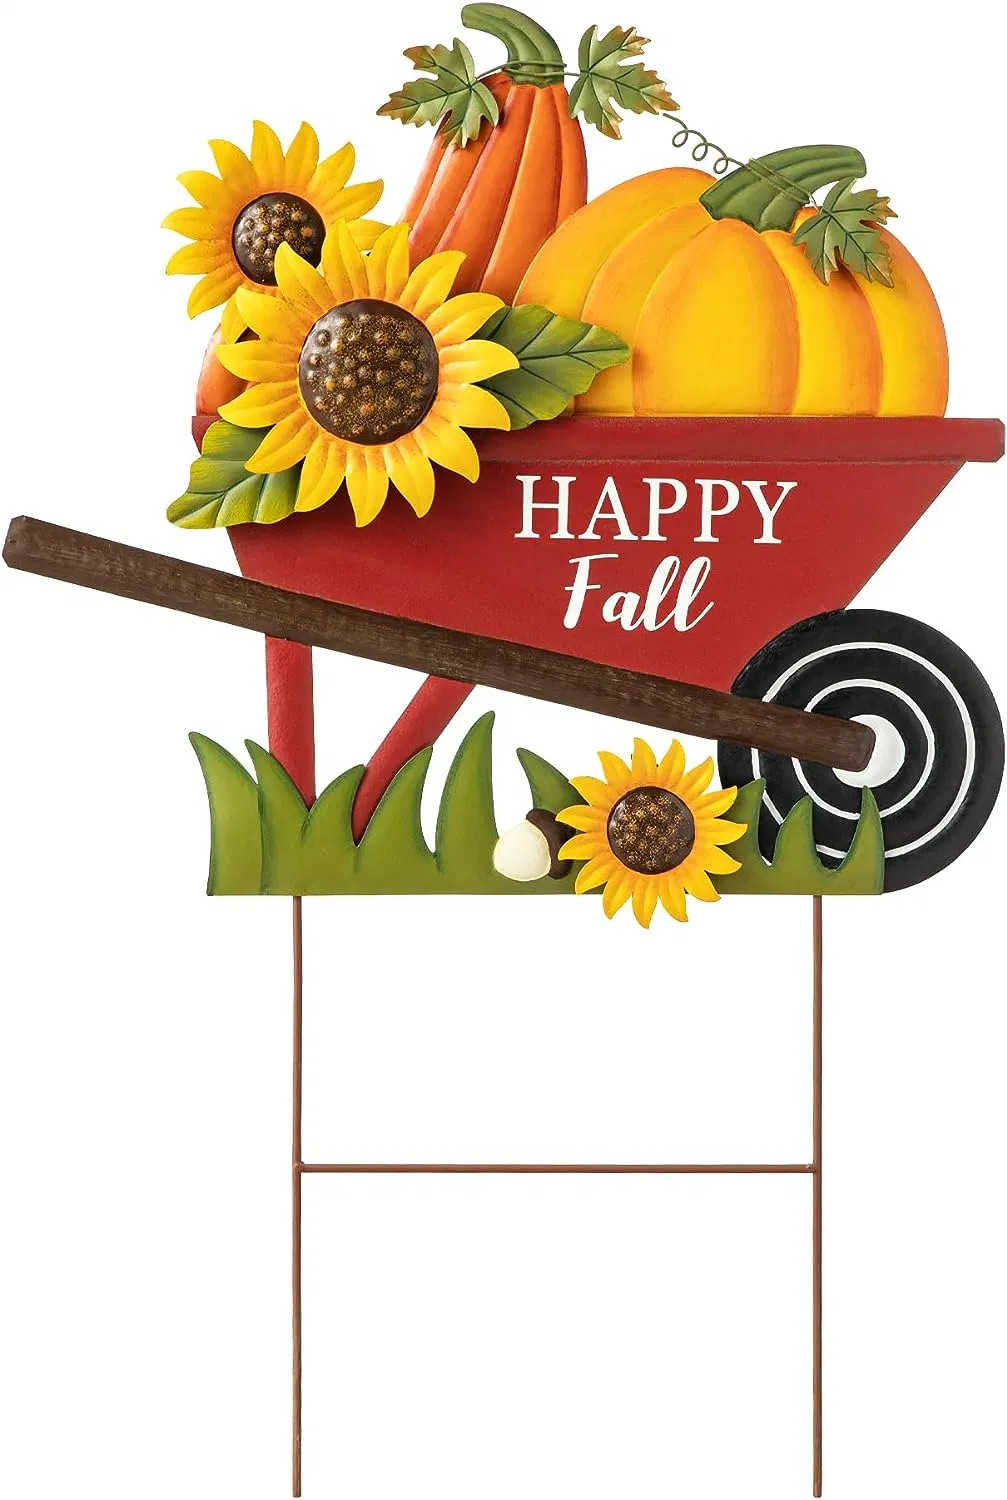 Metal Wheel Barrow Pumpkin Yard Stake/Hanging Wall Decor, Pumpkin Wagon Cart with Happy Fall Signs, Fall Harvest Porch Decorations for Garden Yarden Lawn Sign